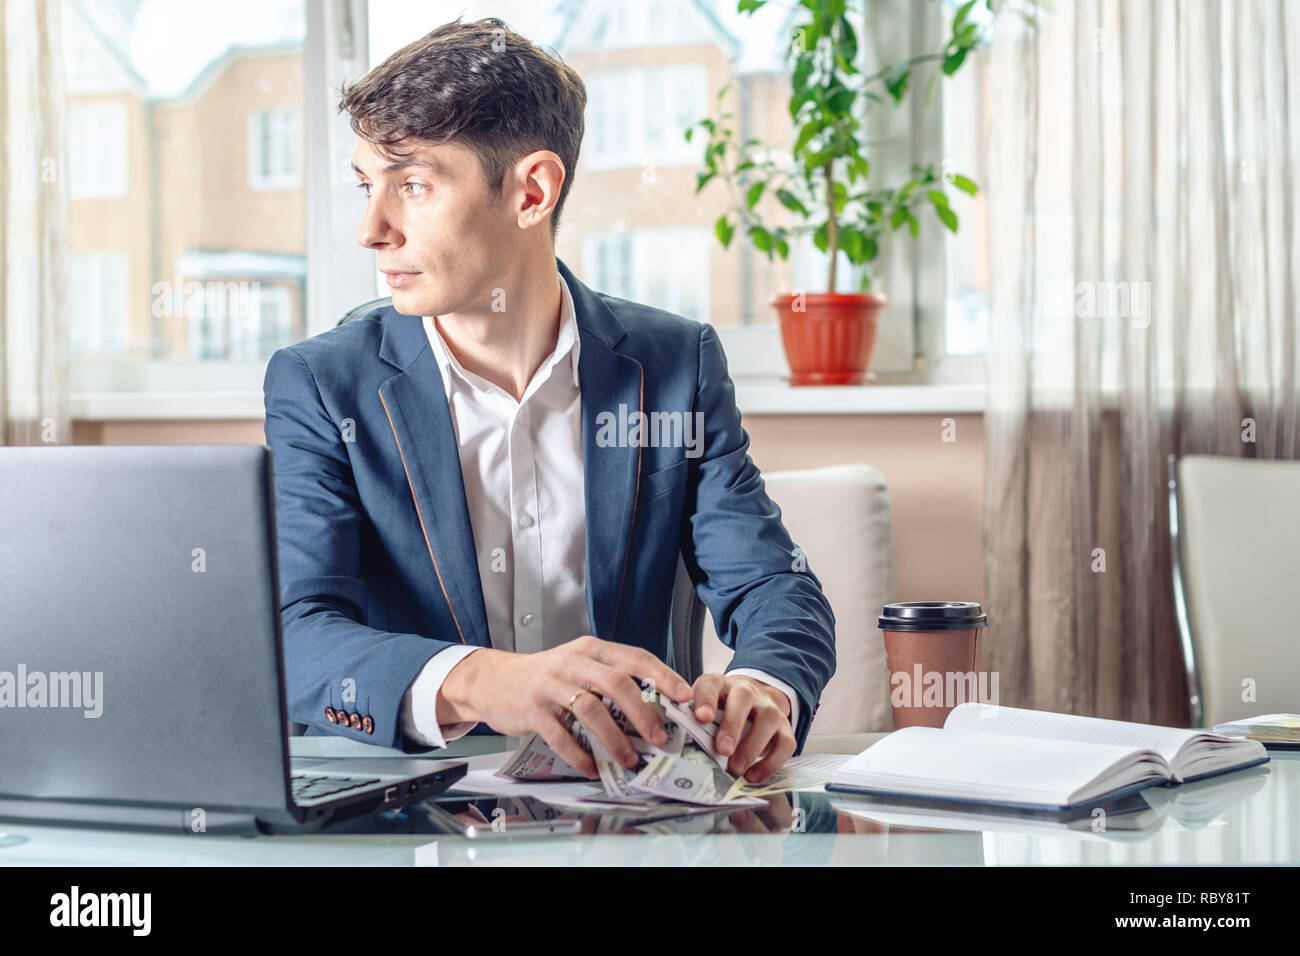 Businessman official sitting in the workplace in the office hides a bribe unnoticed in his pocket. The concept of corruption and bribery Stock Photo